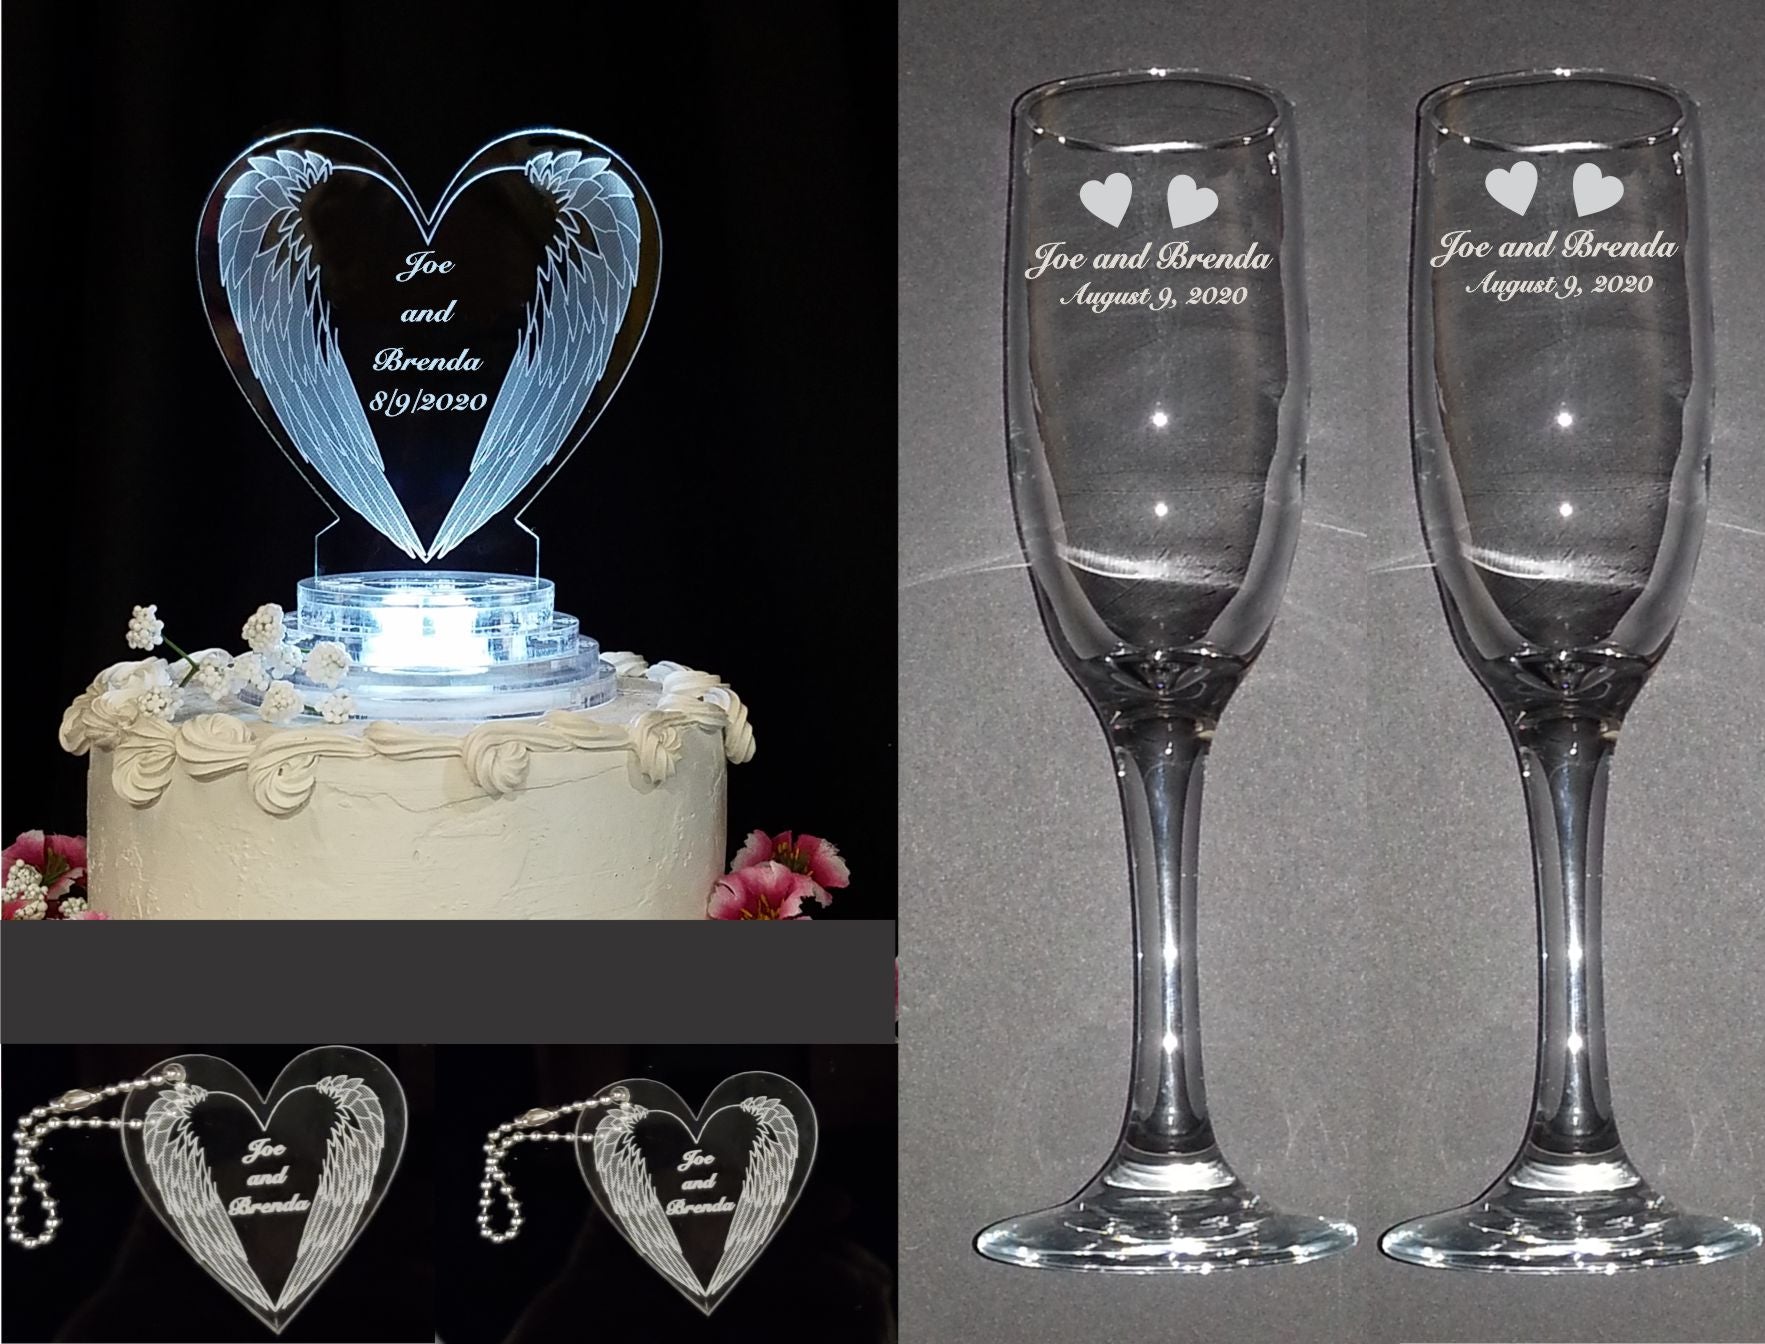 photo showing wedding package that includes a heart shaped cake topper designed with downward angel wings, 2 sizes of matching keychain favors and a set of 2 champagne flutes